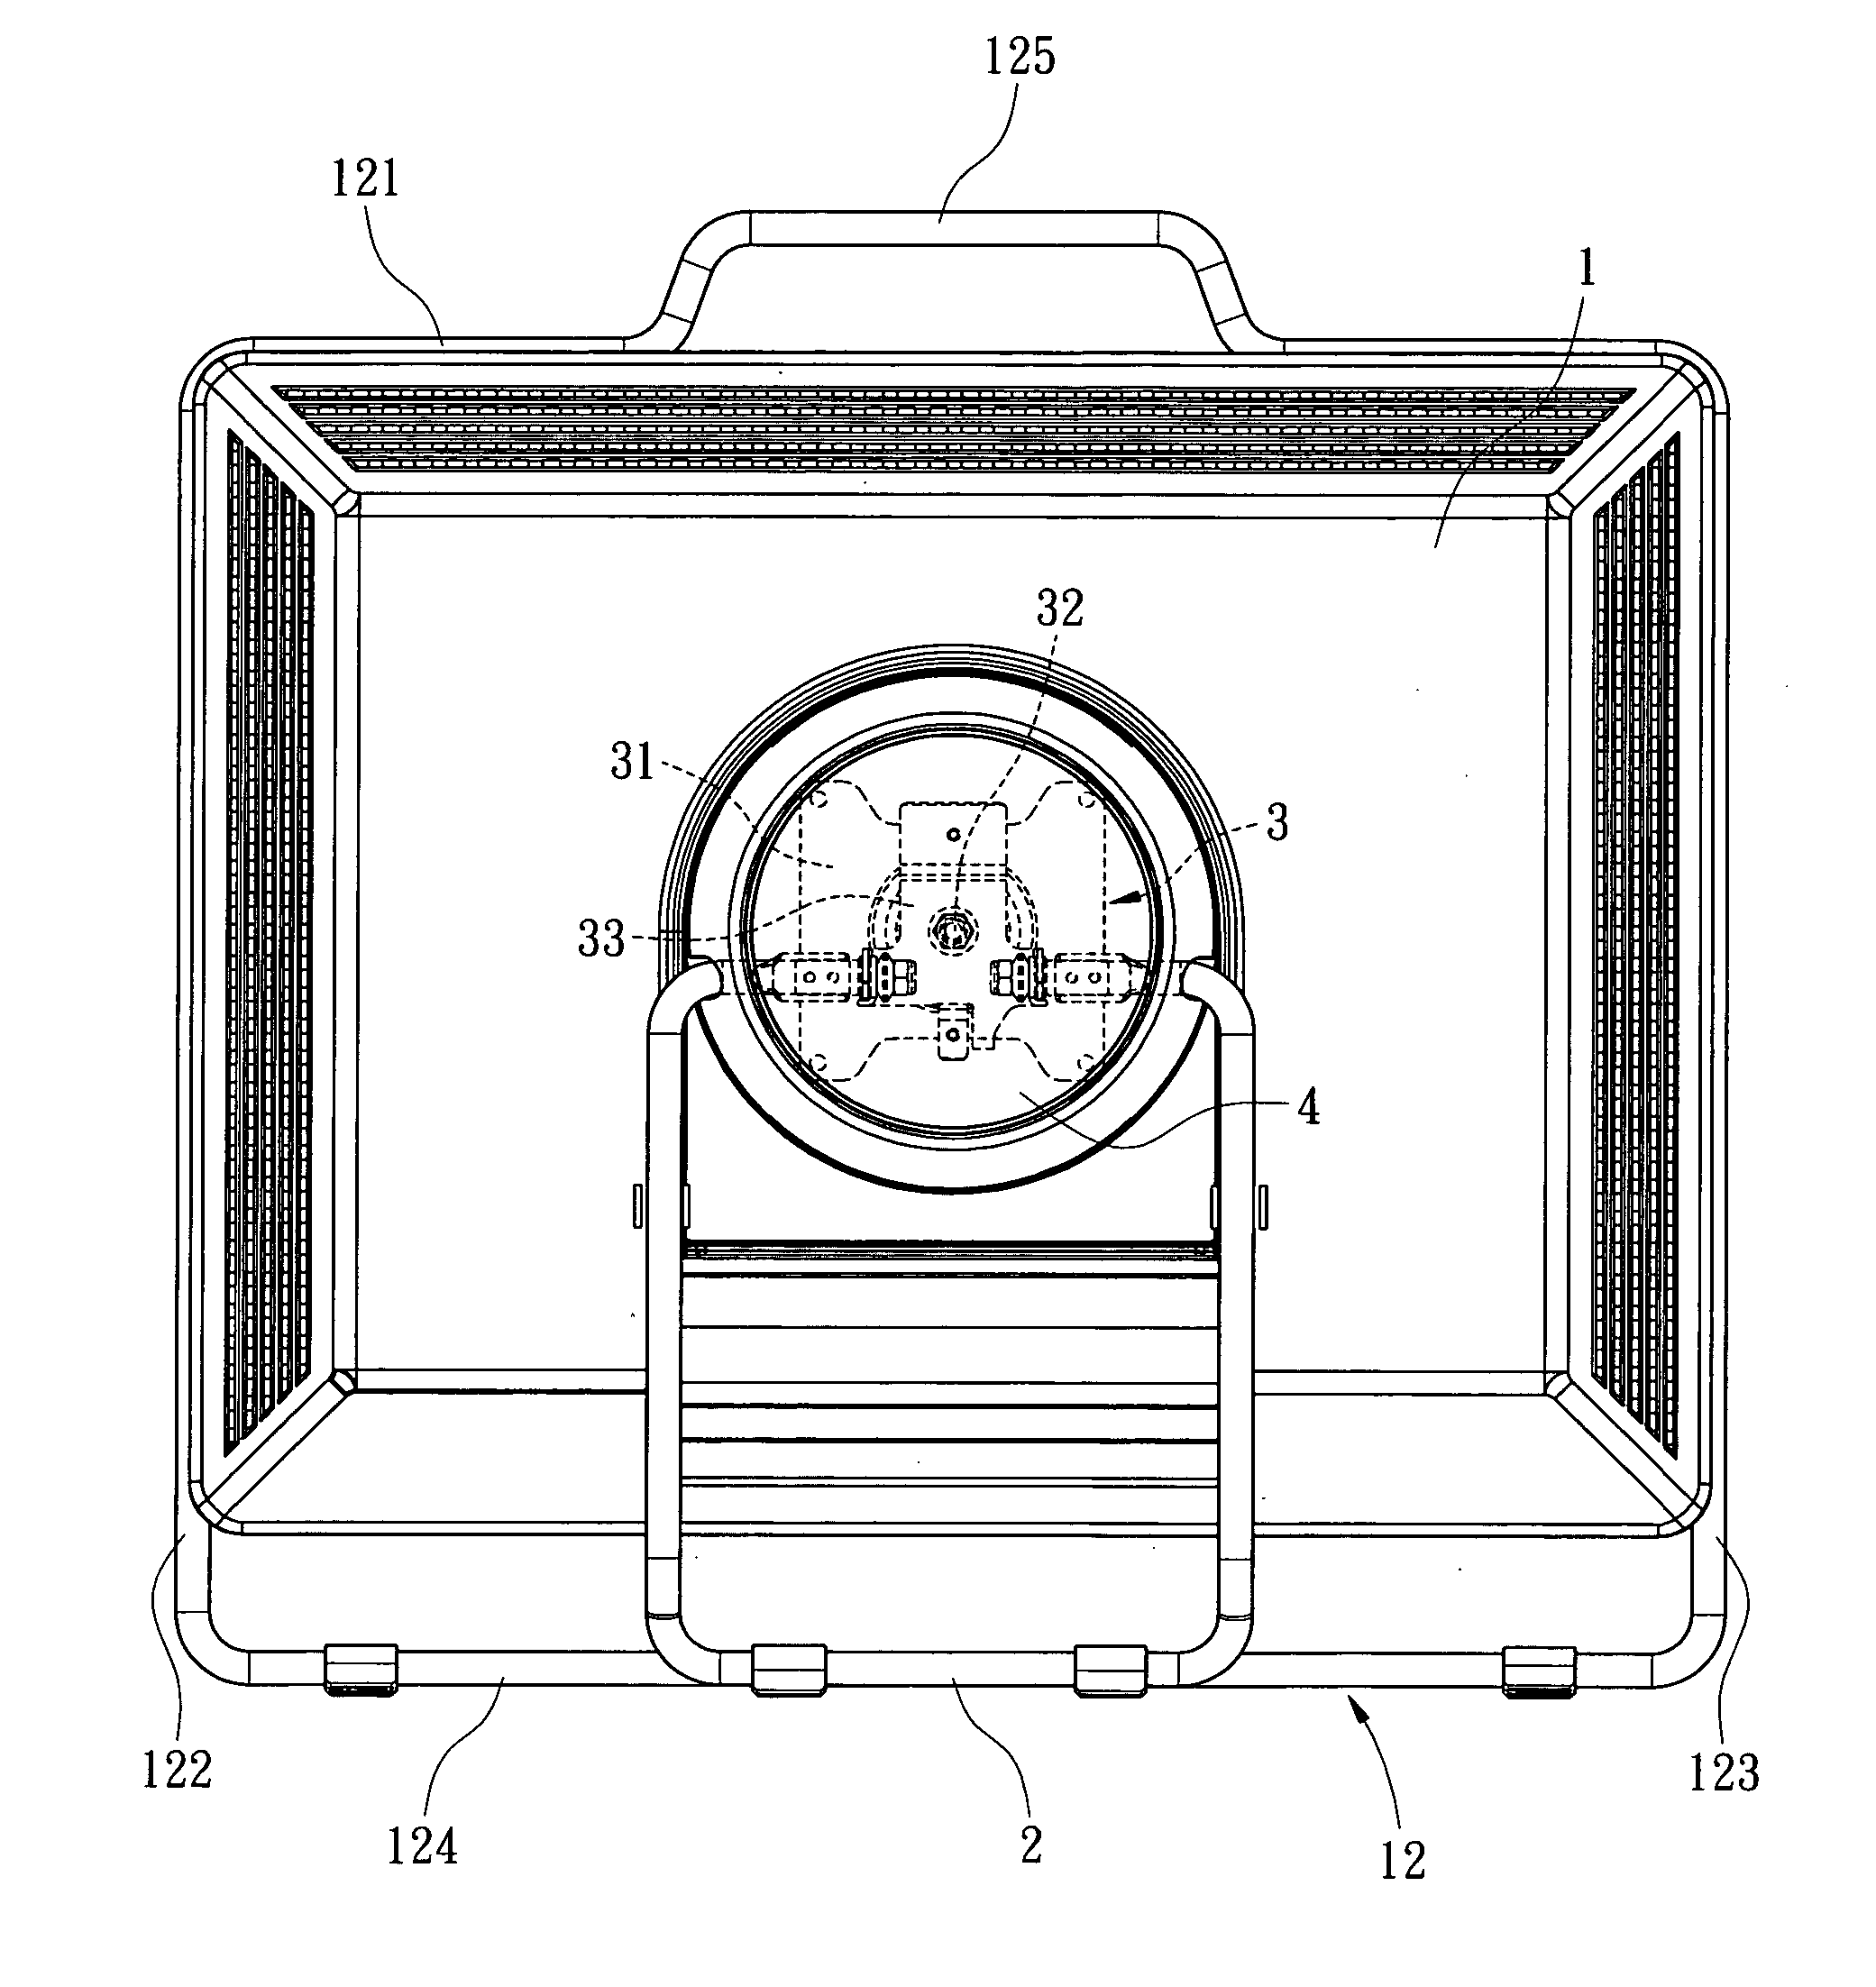 Monitor supporting and rotating structure